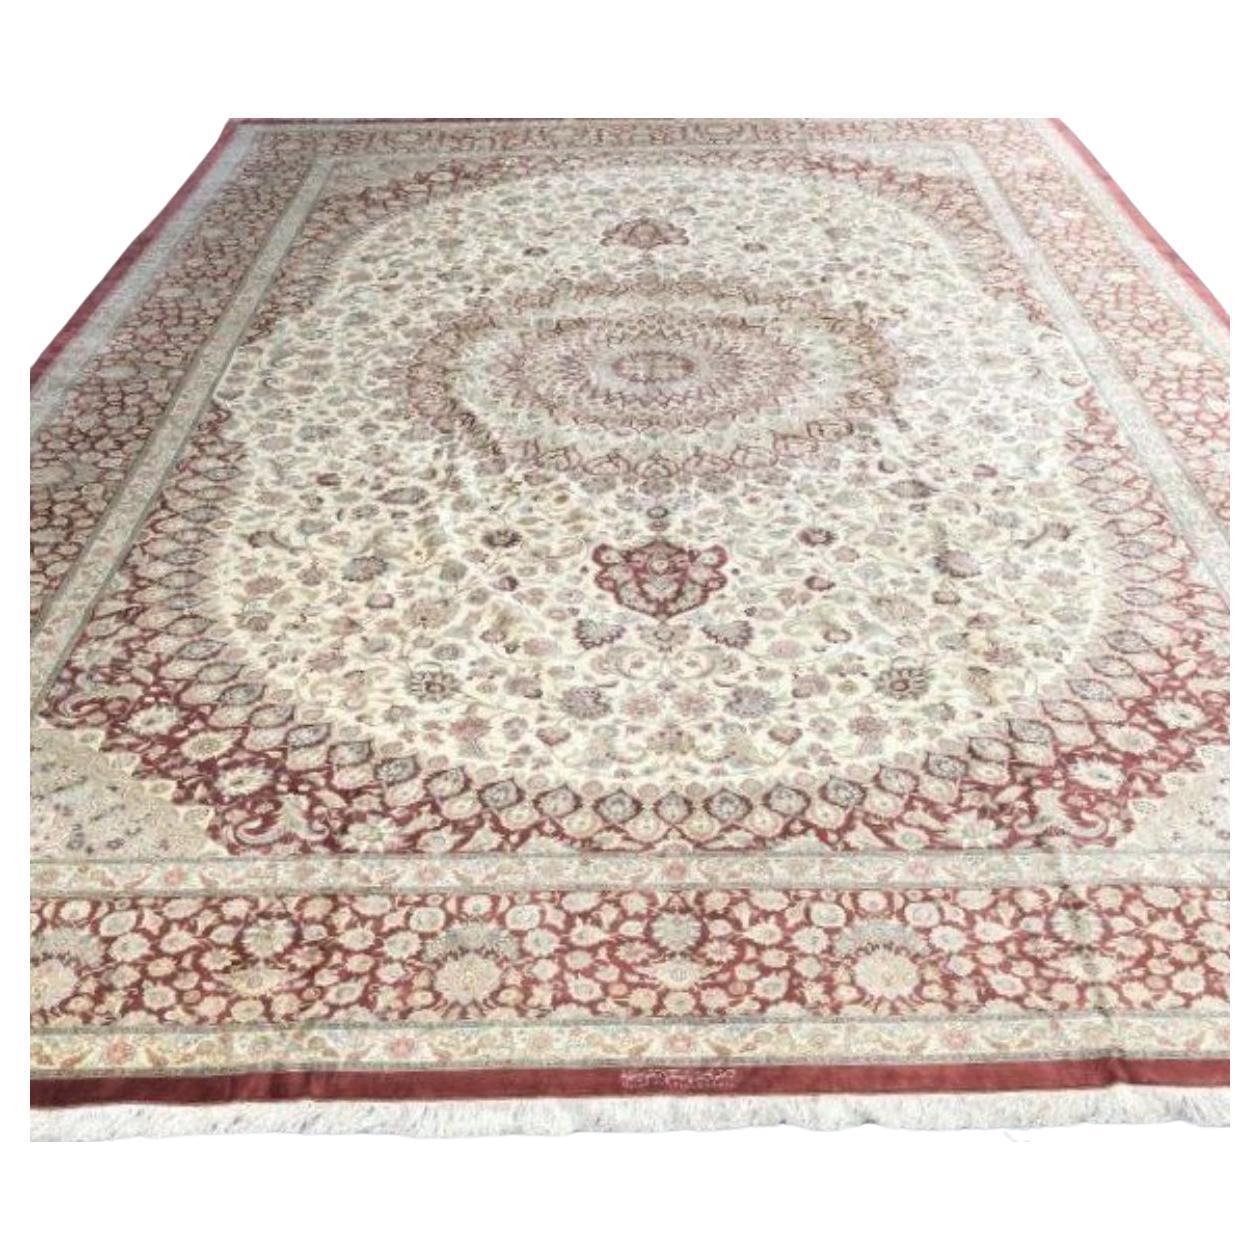 Very Fine Large Persian Silk Qum Rug 14.7' x 21.4' For Sale